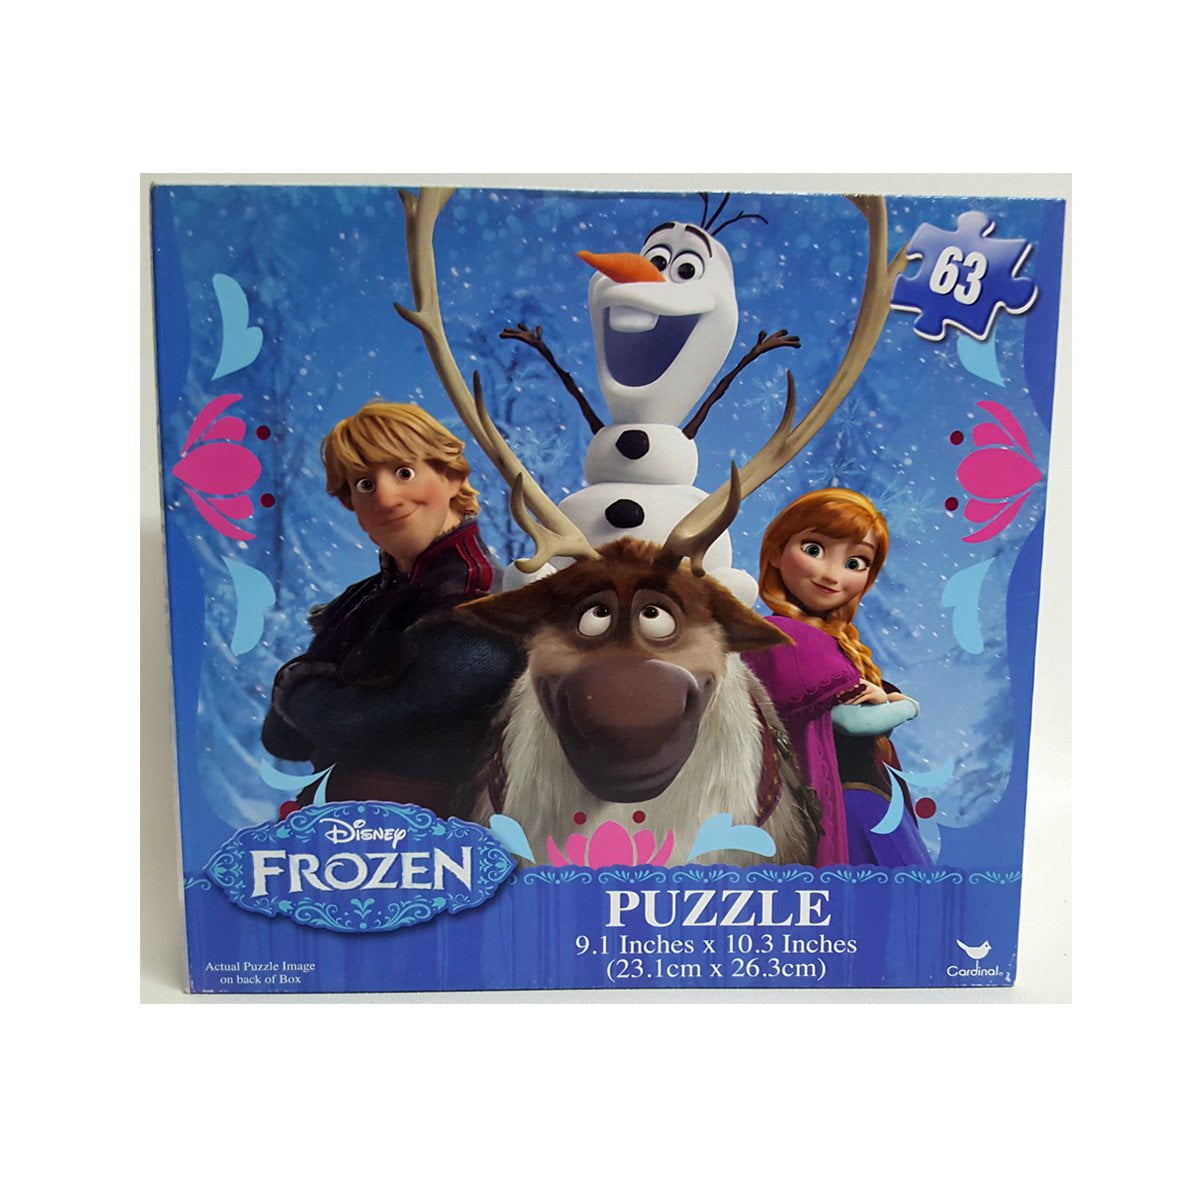 DISNEY FROZEN SVEN AND OLAF 48 PIECE PUZZLE 9.1 inches x 10.3 inches